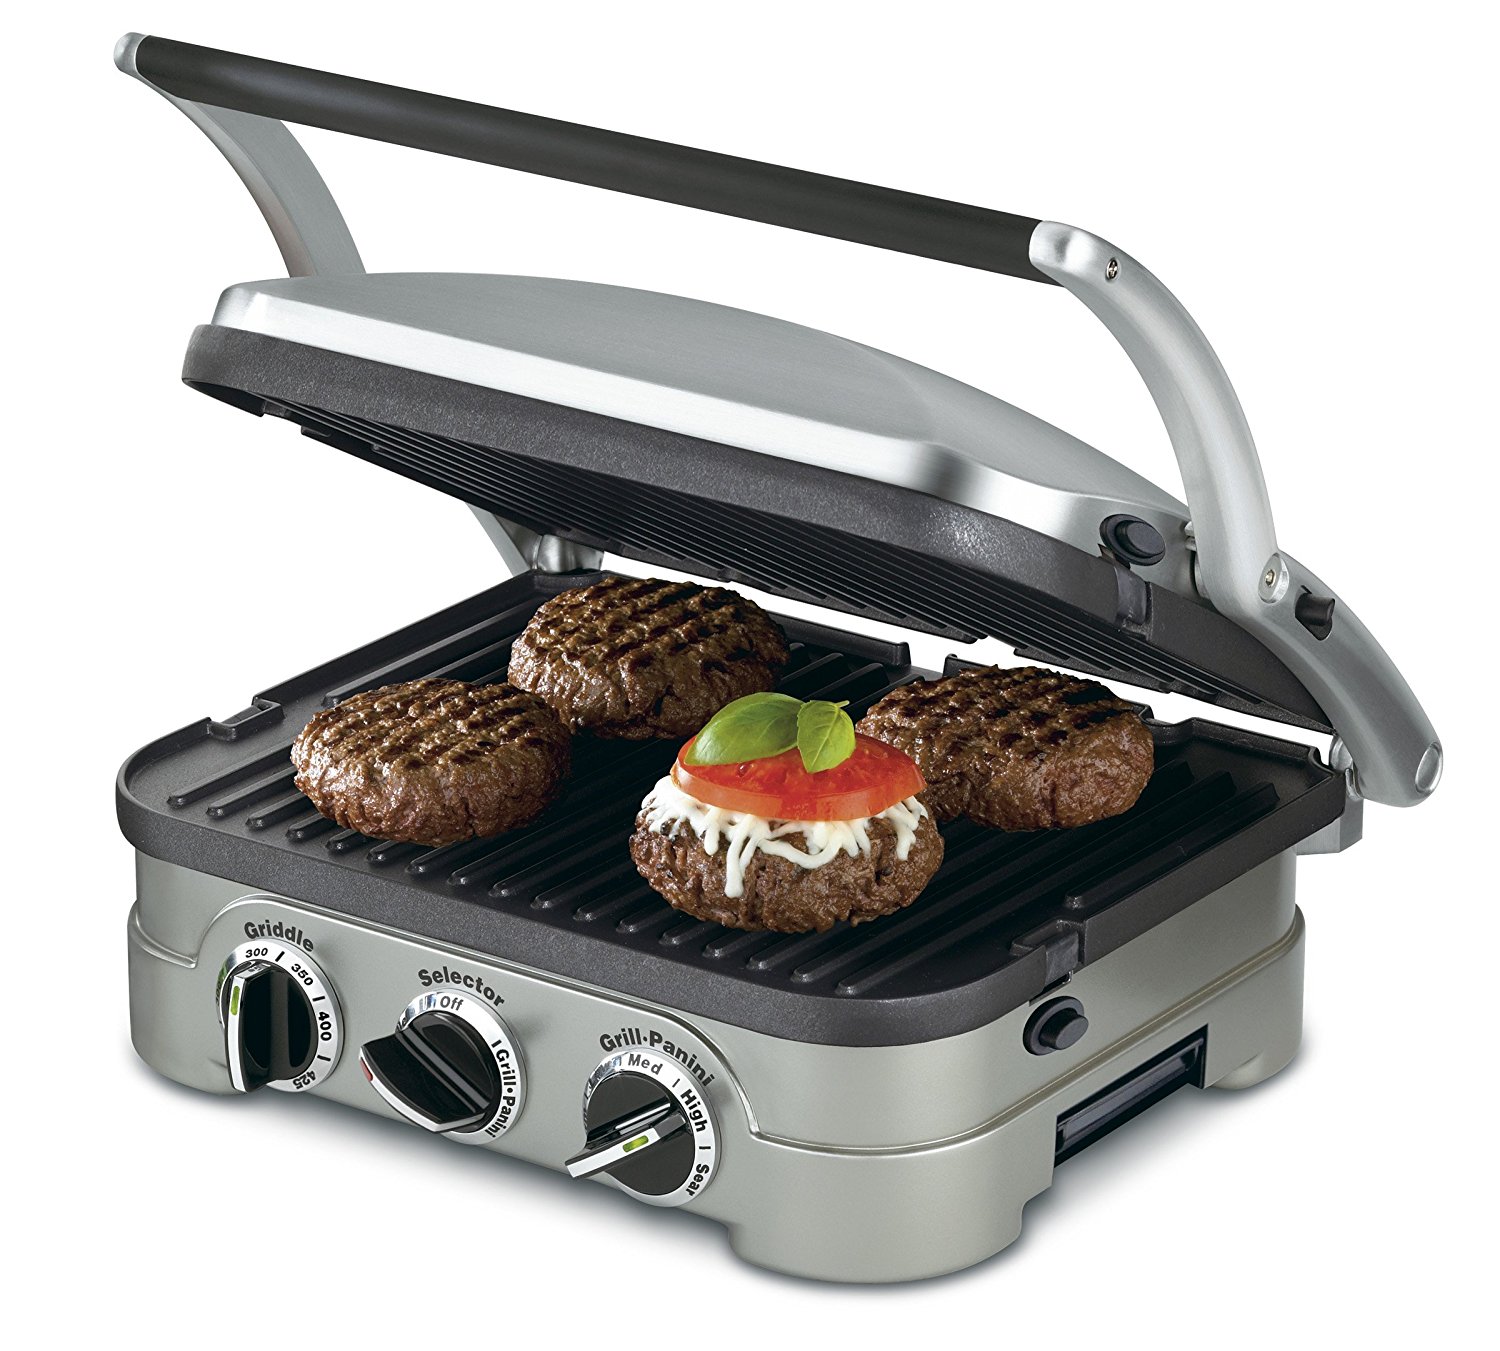 Add the Flexibility of a Combination Grill and Griddle to Your Kitchen